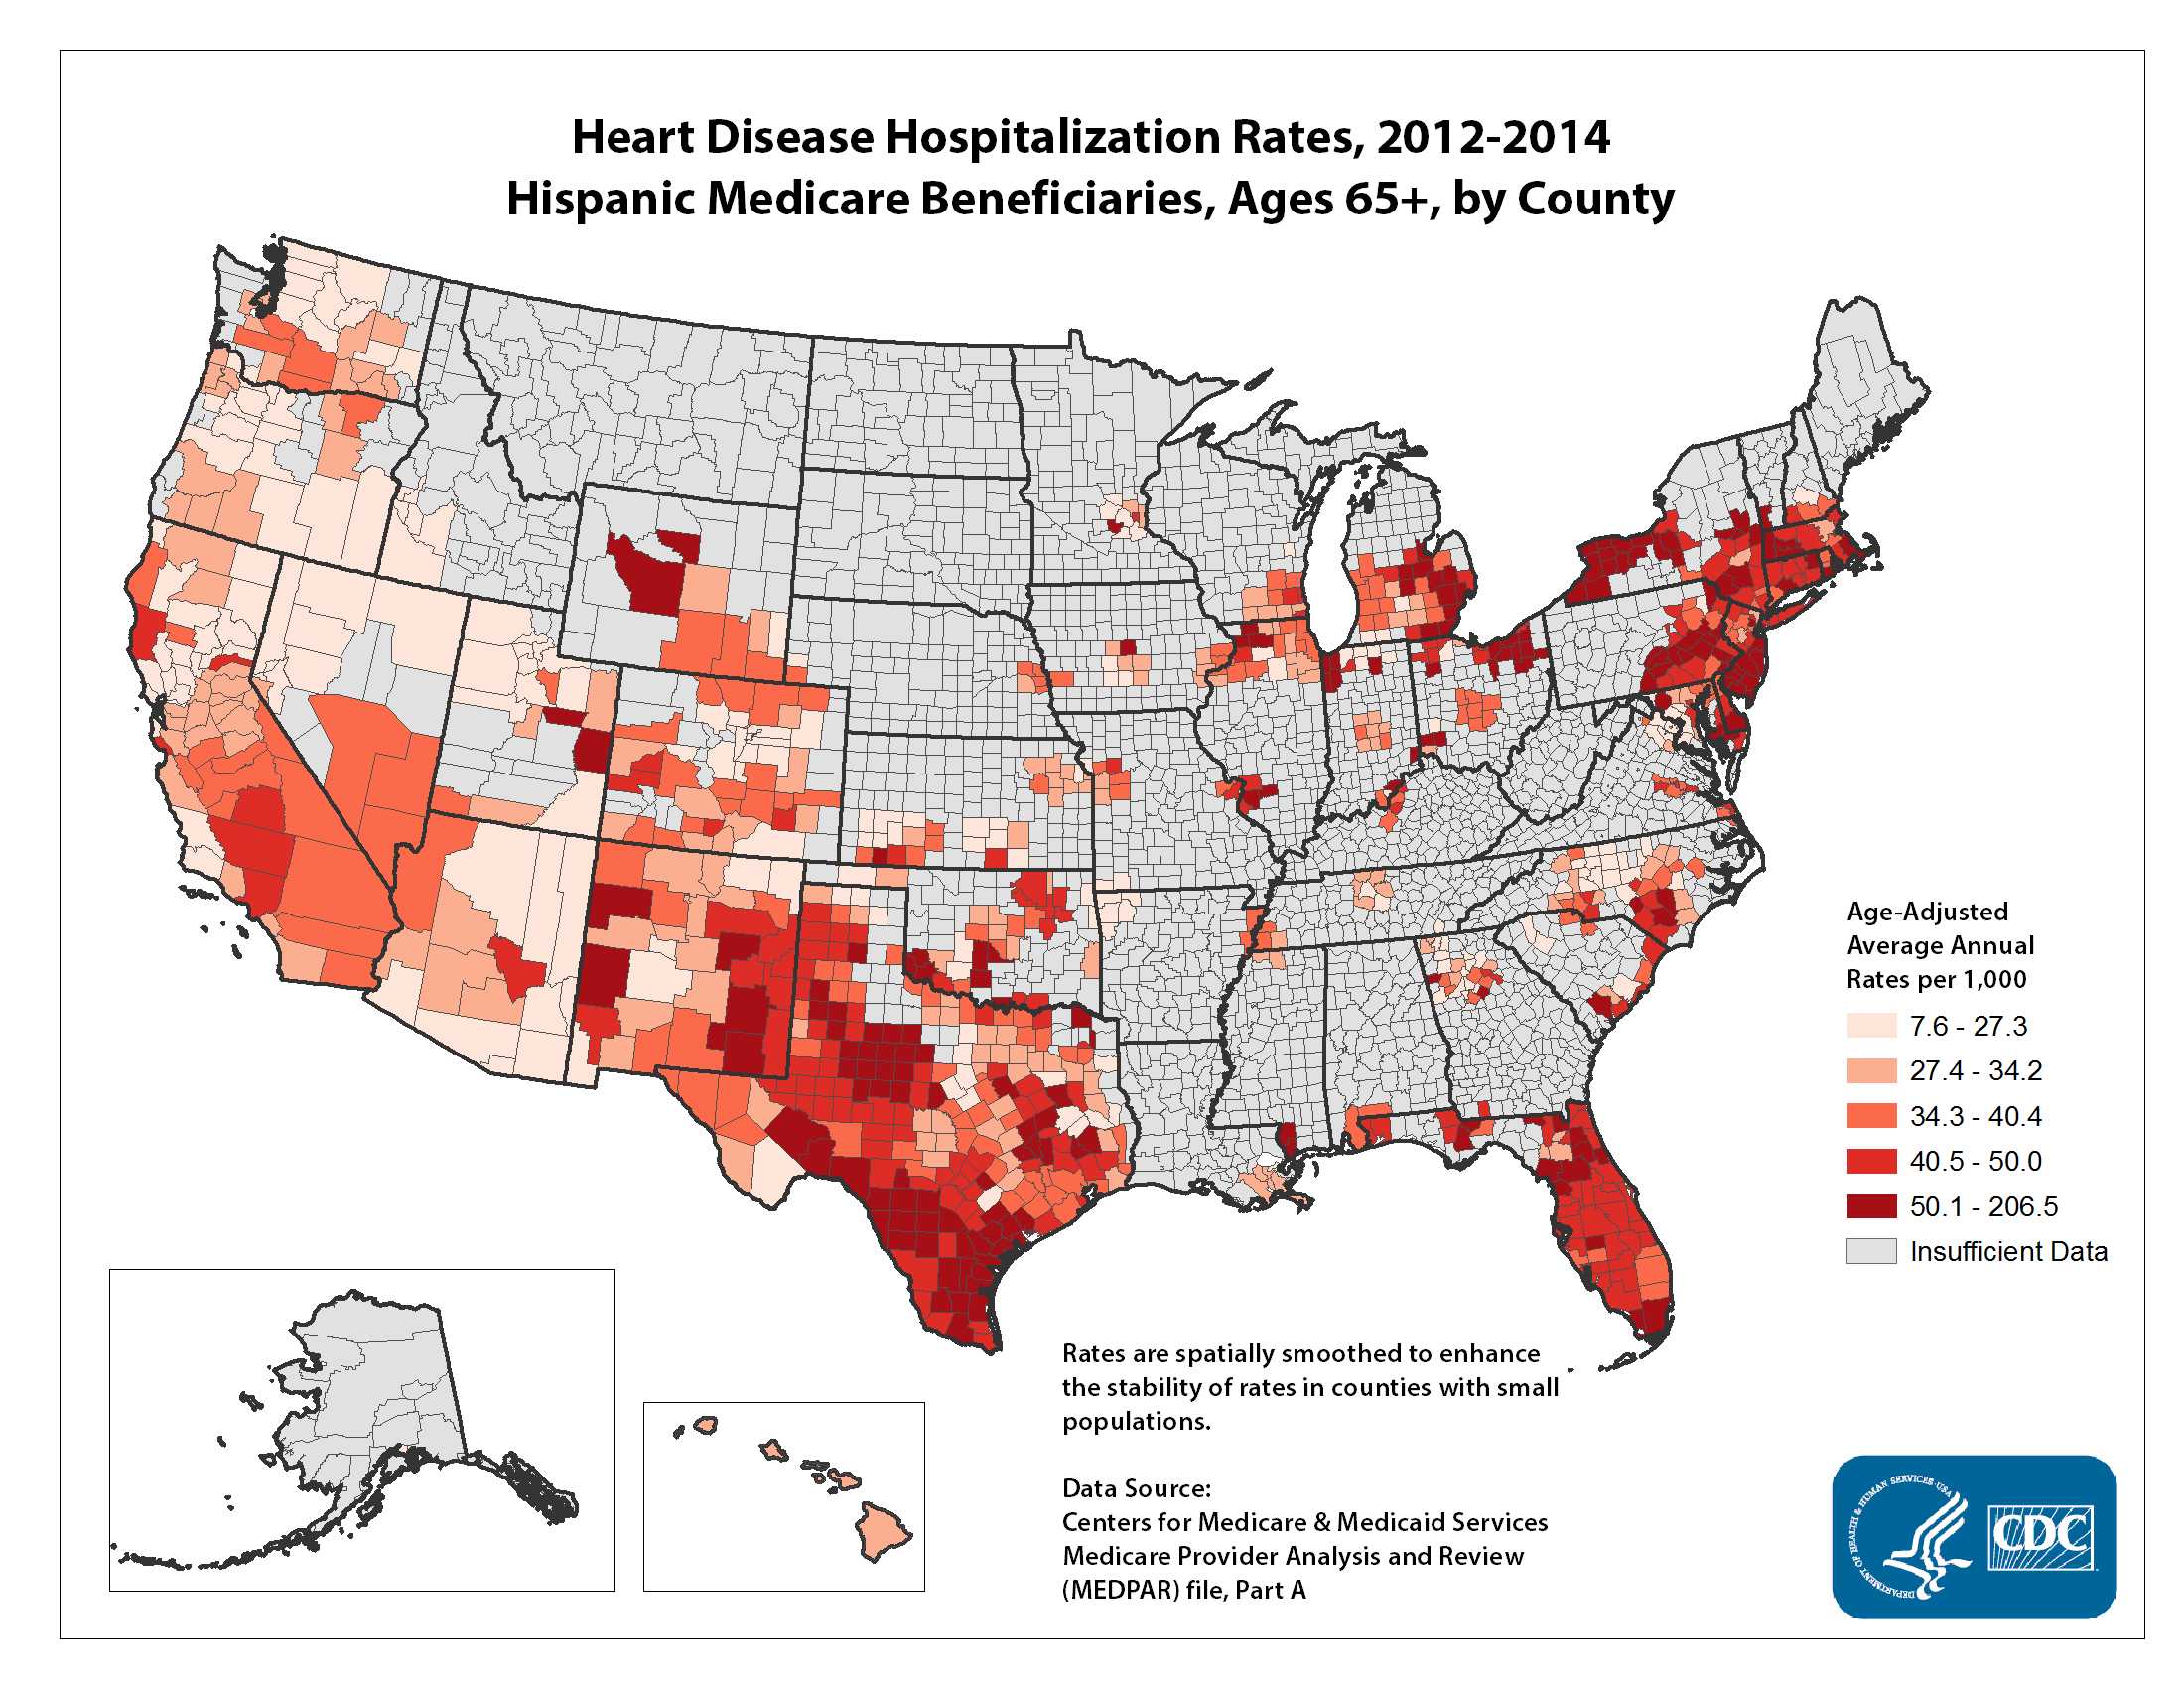 Heart Disease Hospitalization Rates for 2010 through 2012 for Hispanics Aged 65 Years and Older by County. The map shows that concentrations of counties with the highest heart disease hospitalization rates - meaning the top quintile - are located primarily in parts of Texas, Michigan, Ohio, New York, New Jersey, and Pennsylvania.